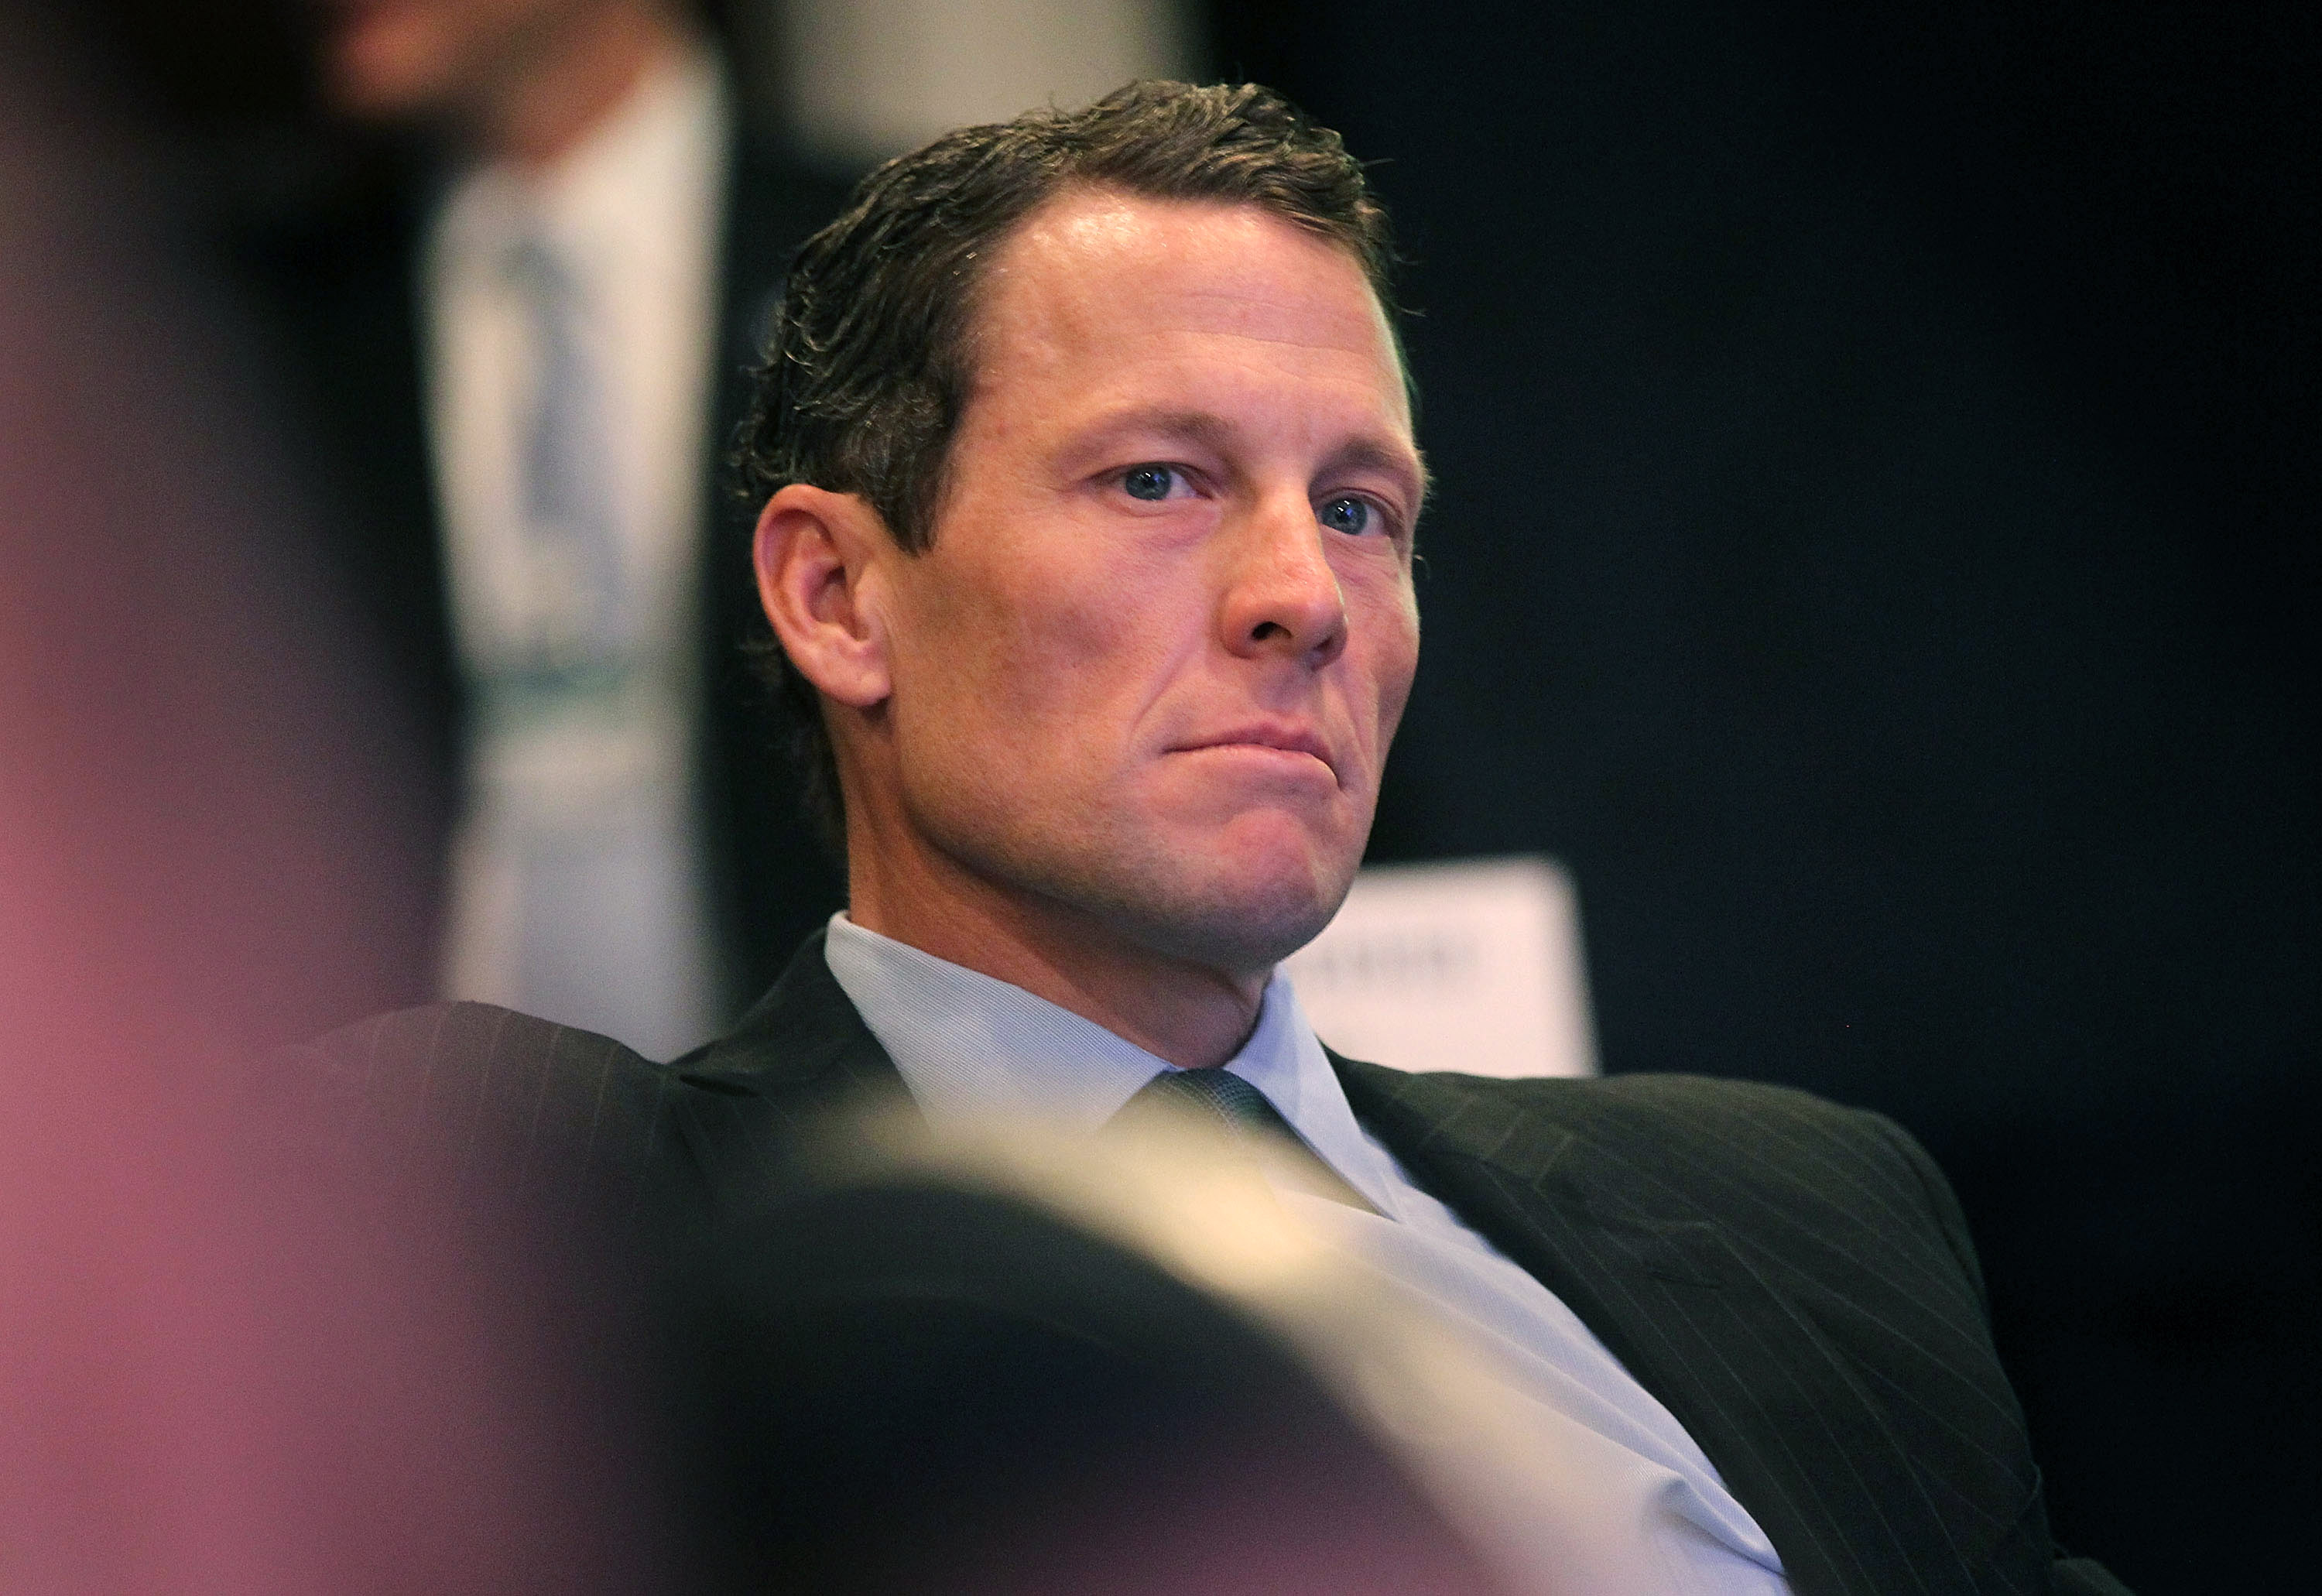 NEW YORK - SEPTEMBER 22:  Lance Armstrong, cyclist and founder and chairman of LIVESTRONG, looks on during the annual Clinton Global Initiative (CGI) September 22, 2010 in New York City. The sixth annual meeting of the CGI gathers prominent individuals in